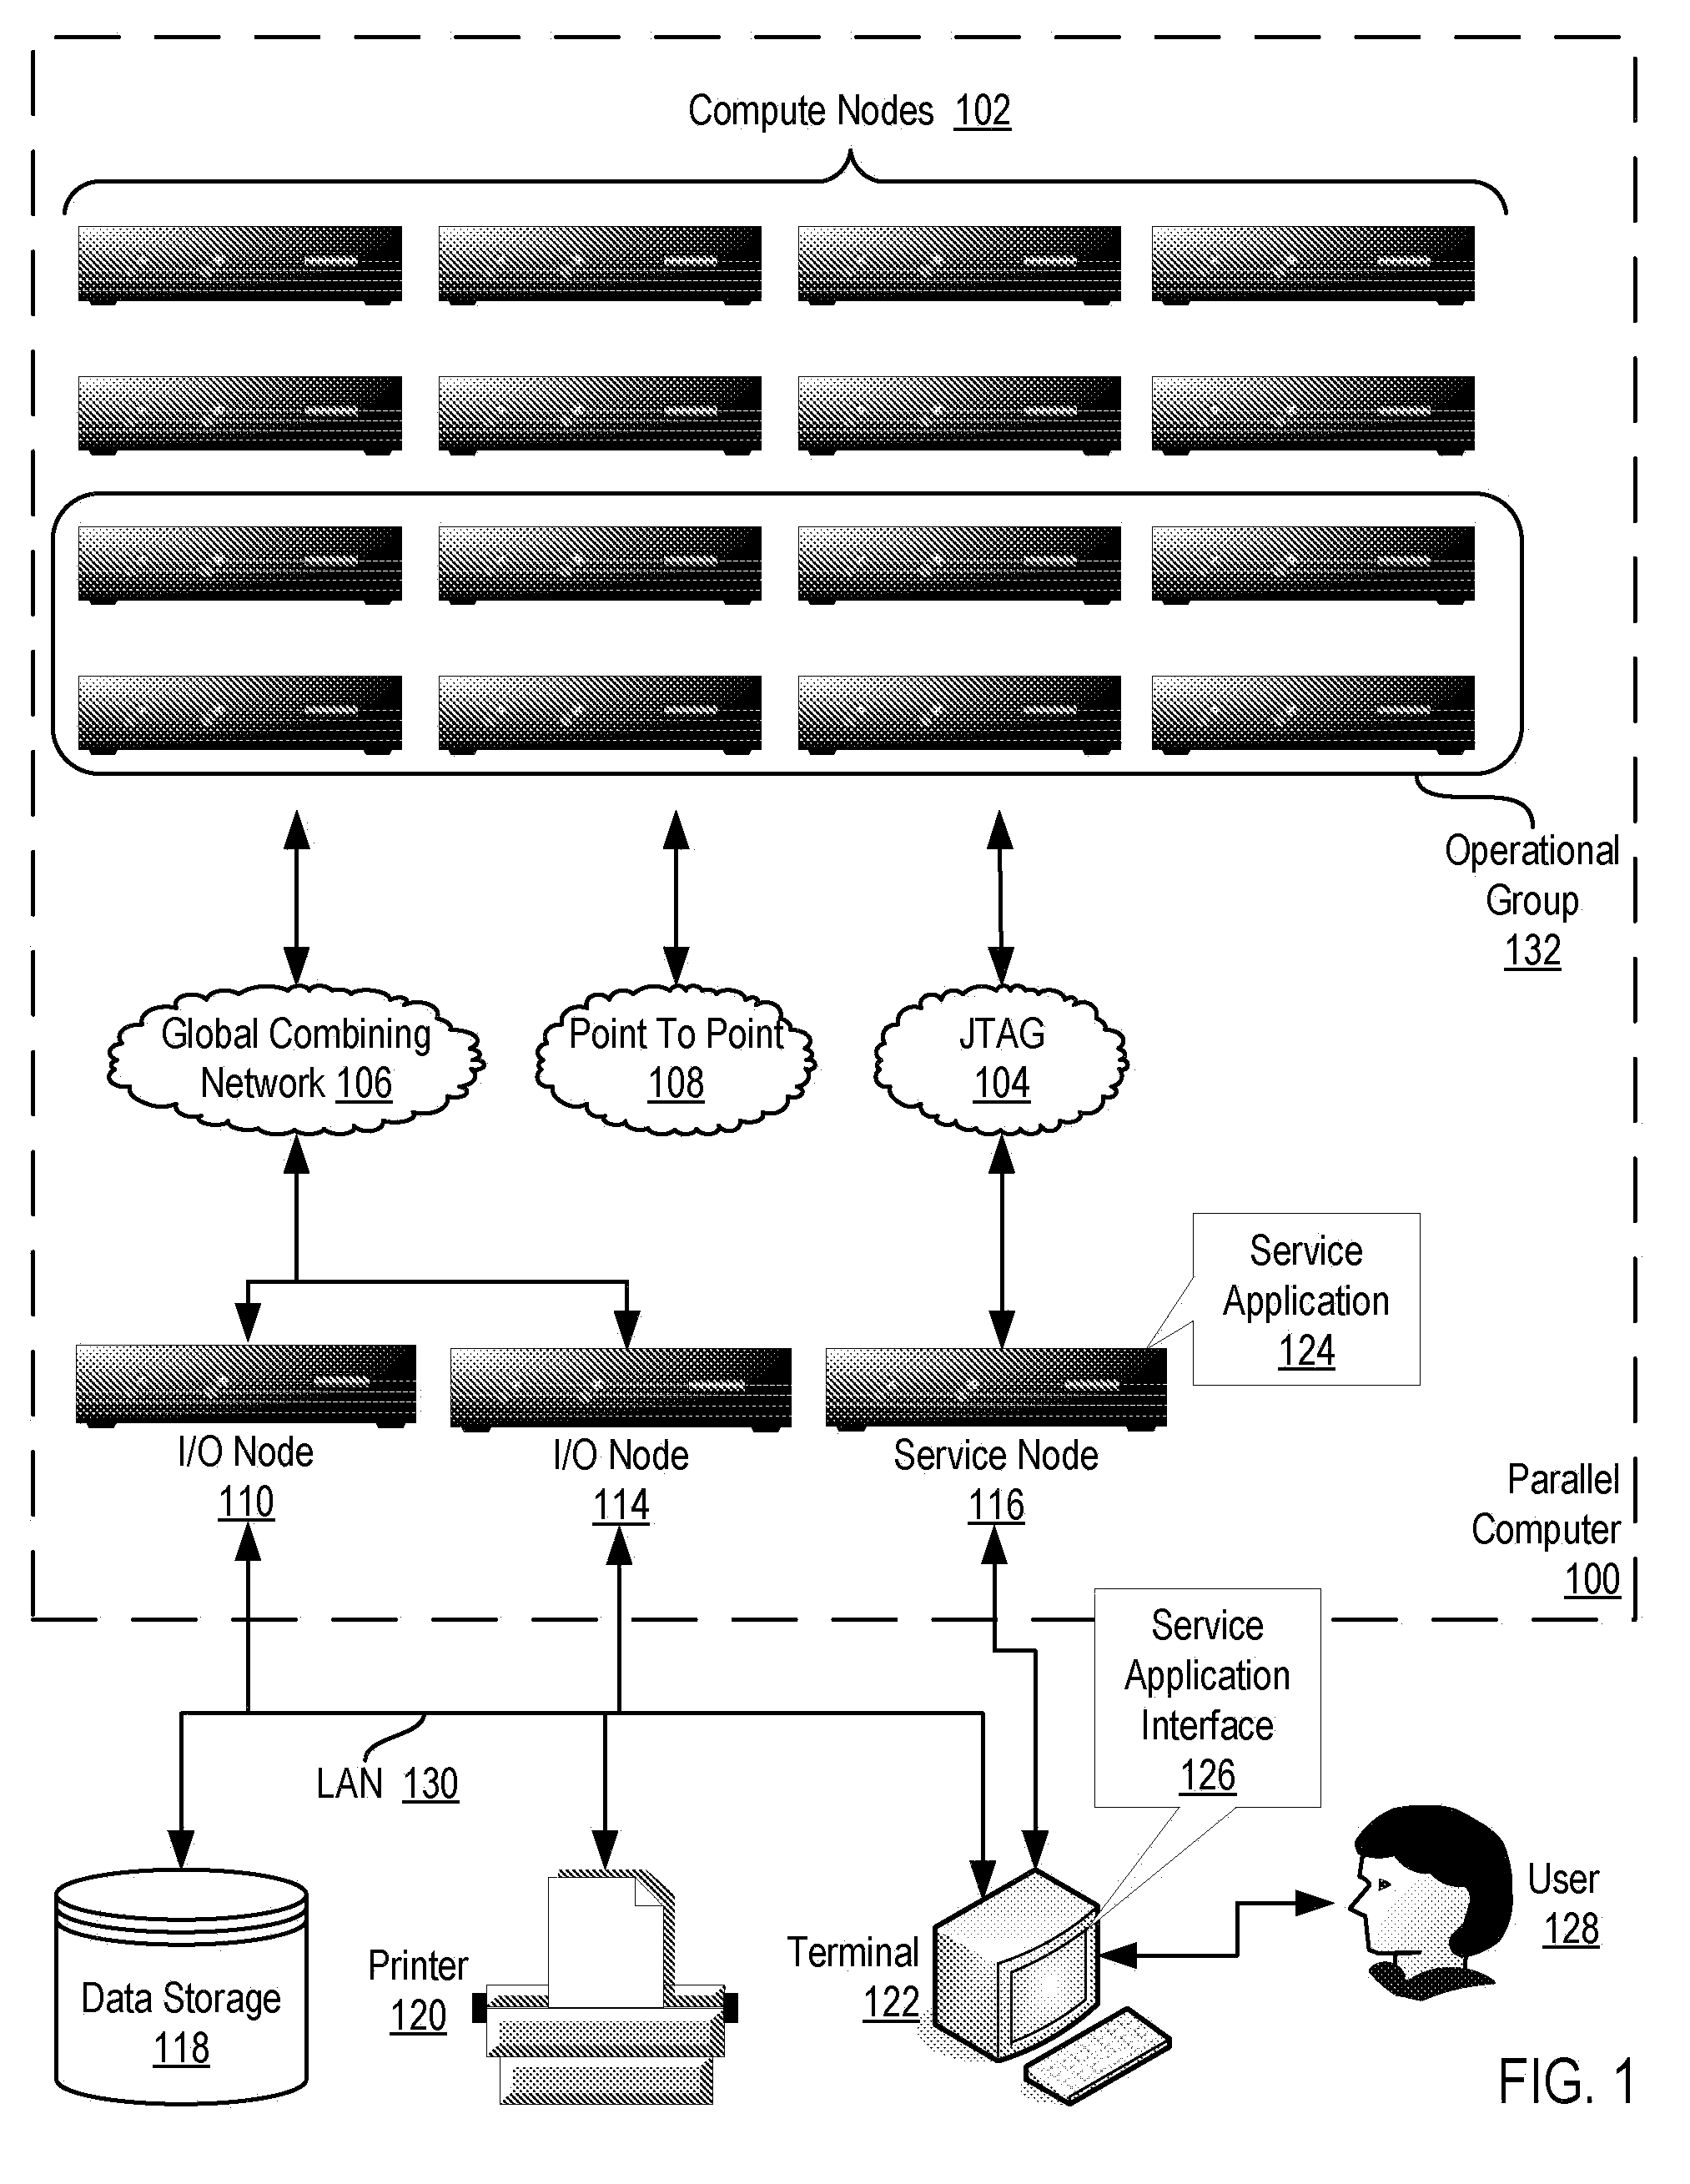 Administering Communications Schedules for Data Communications Among Compute Nodes in a Data Communications Network of a Parallel Computer